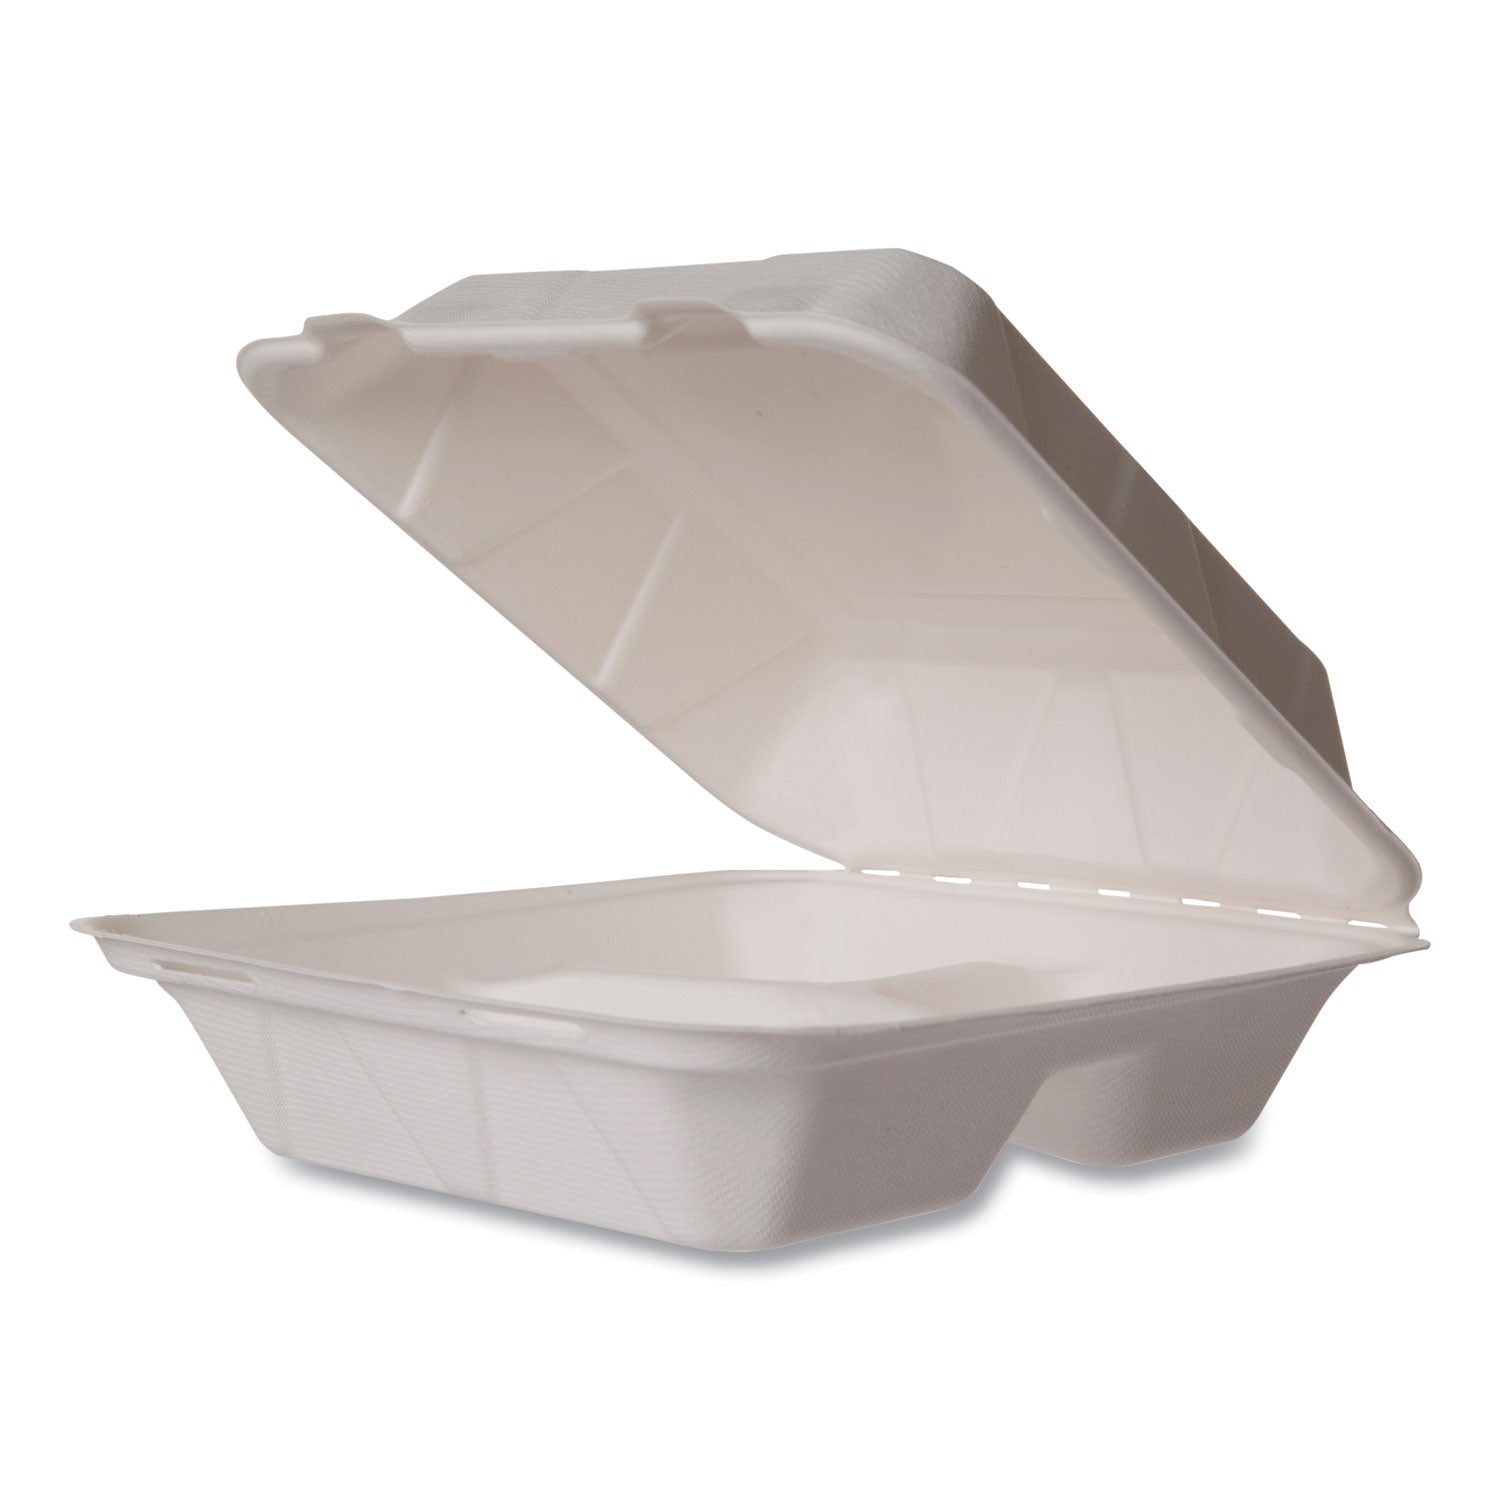 white-molded-fiber-clamshell-containers-3-compartment-79-x-79-x-29-white-sugarcane-200-carton_vegwhbrg83hw - 1